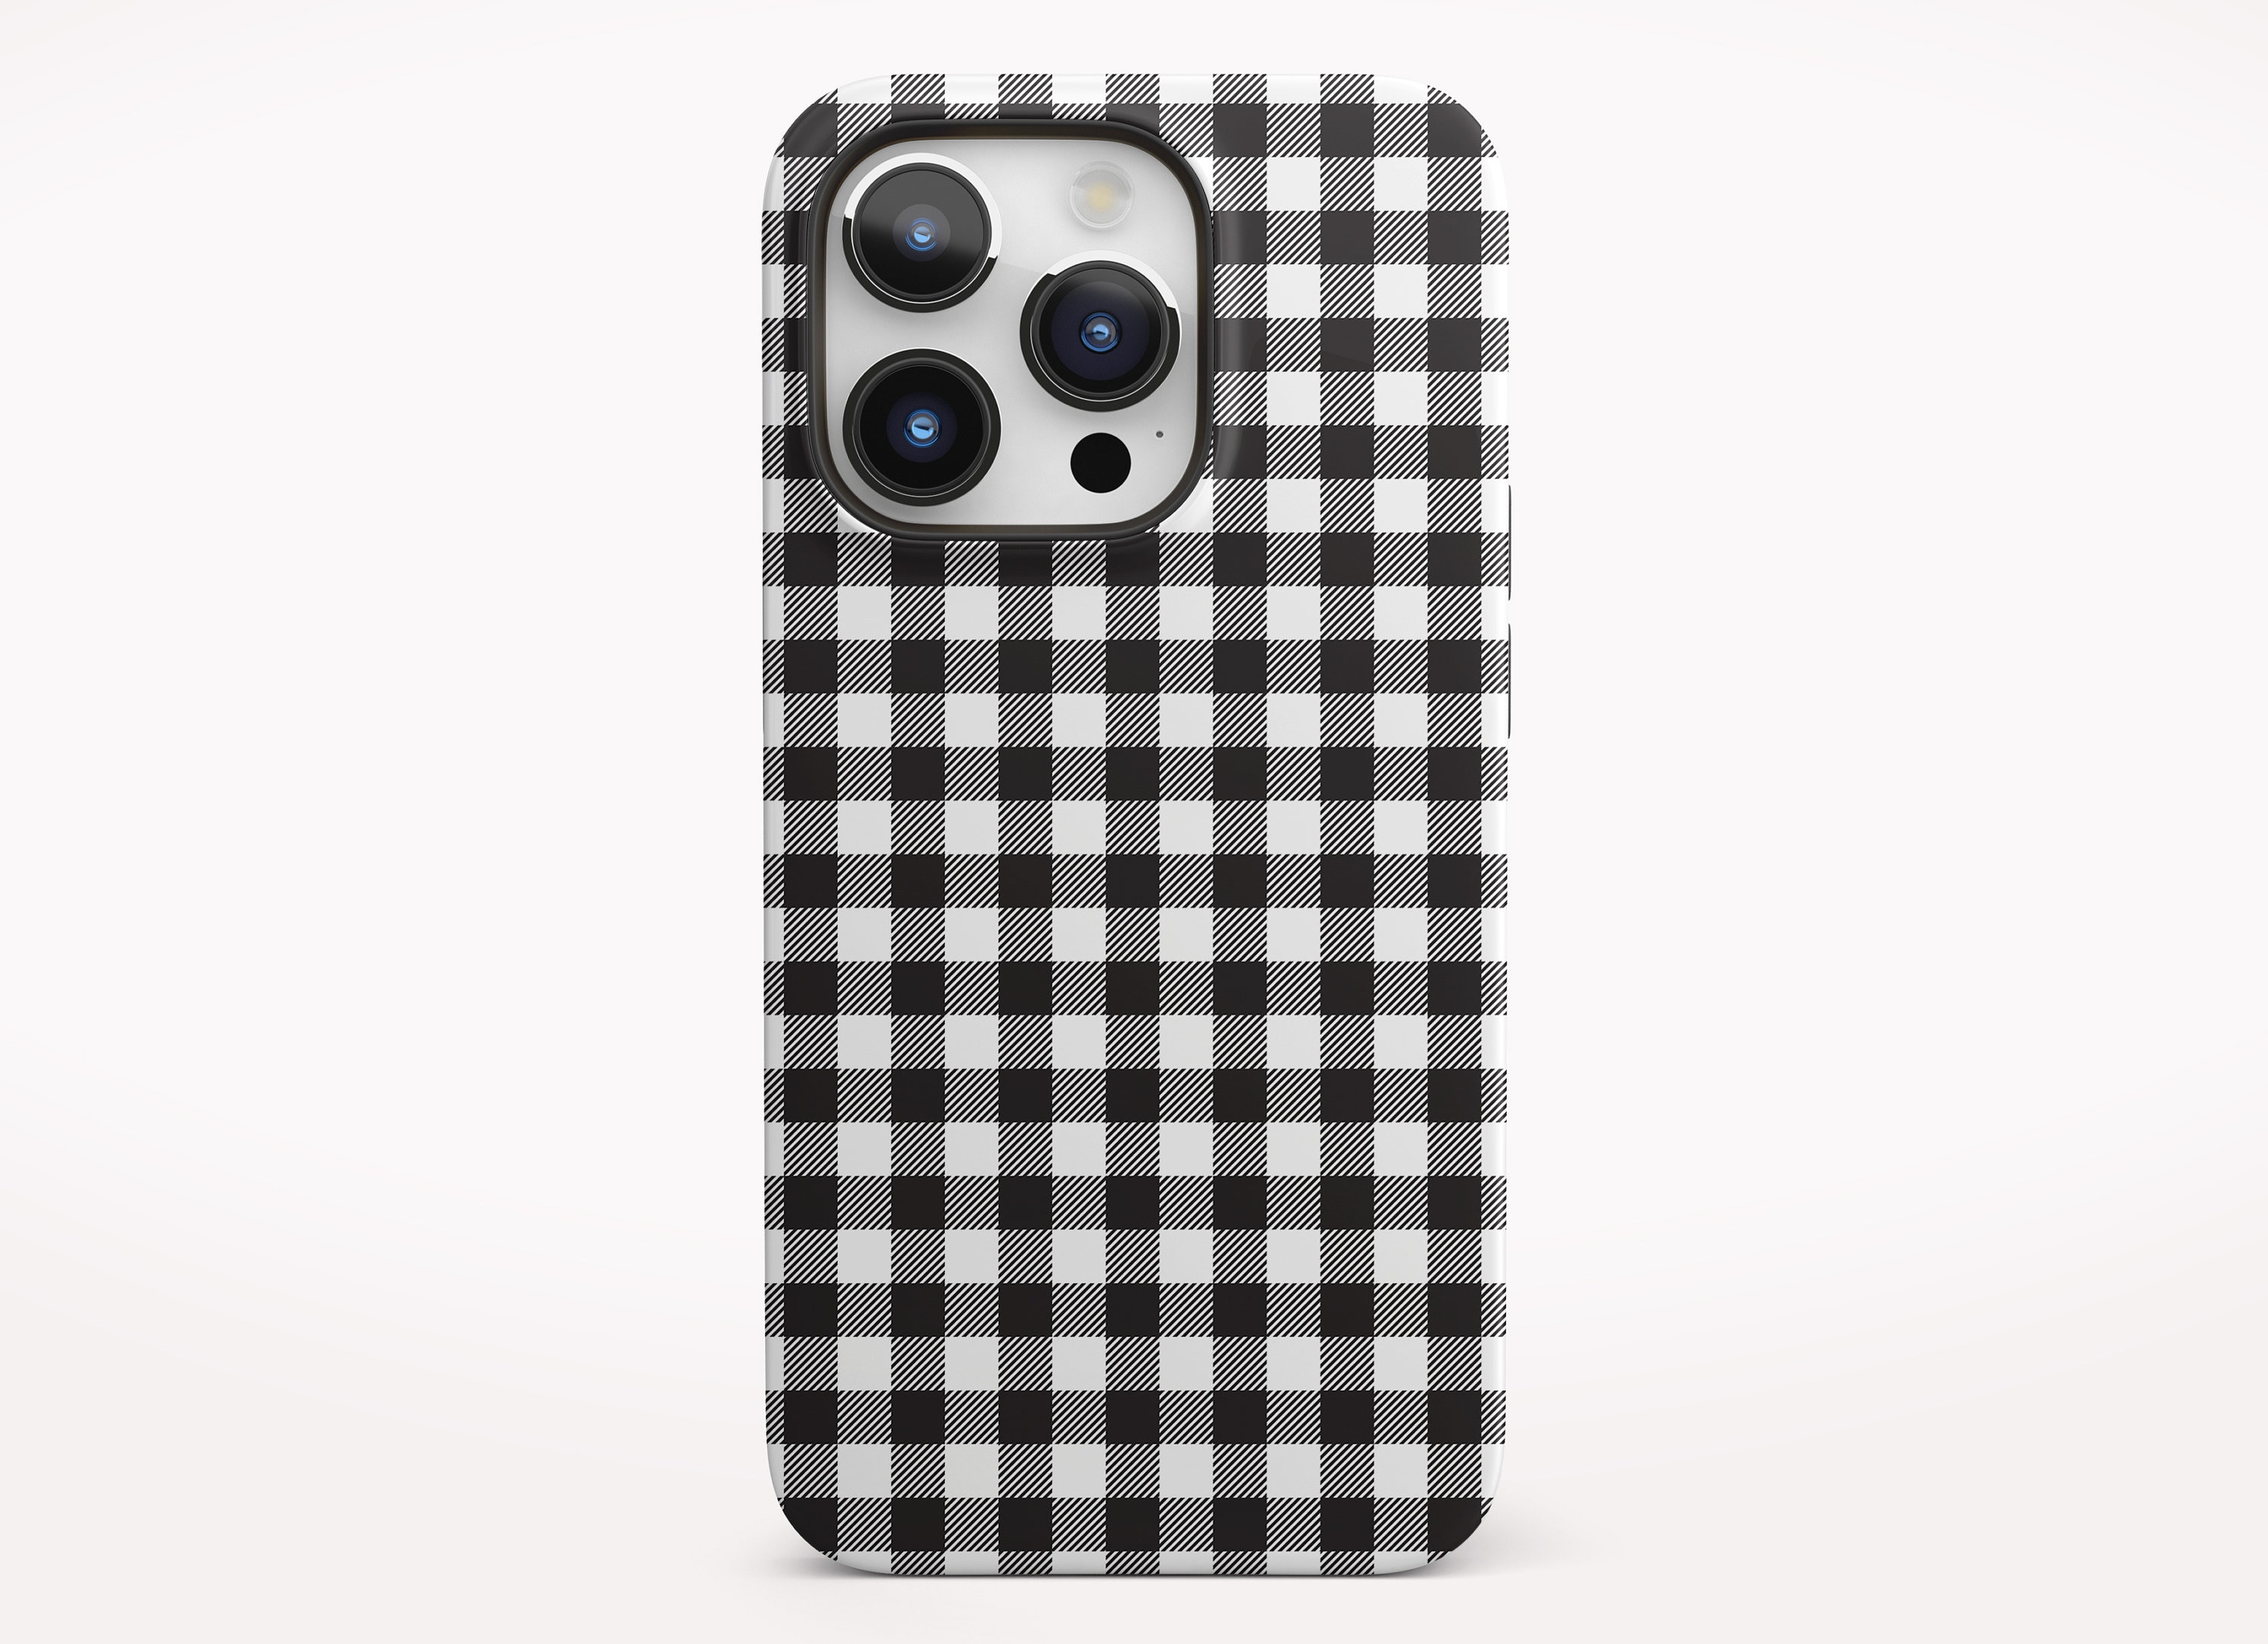 BEIGE Checkered Phone Case iPhone 14/13/12/11 Xs Xr Pro Plus 